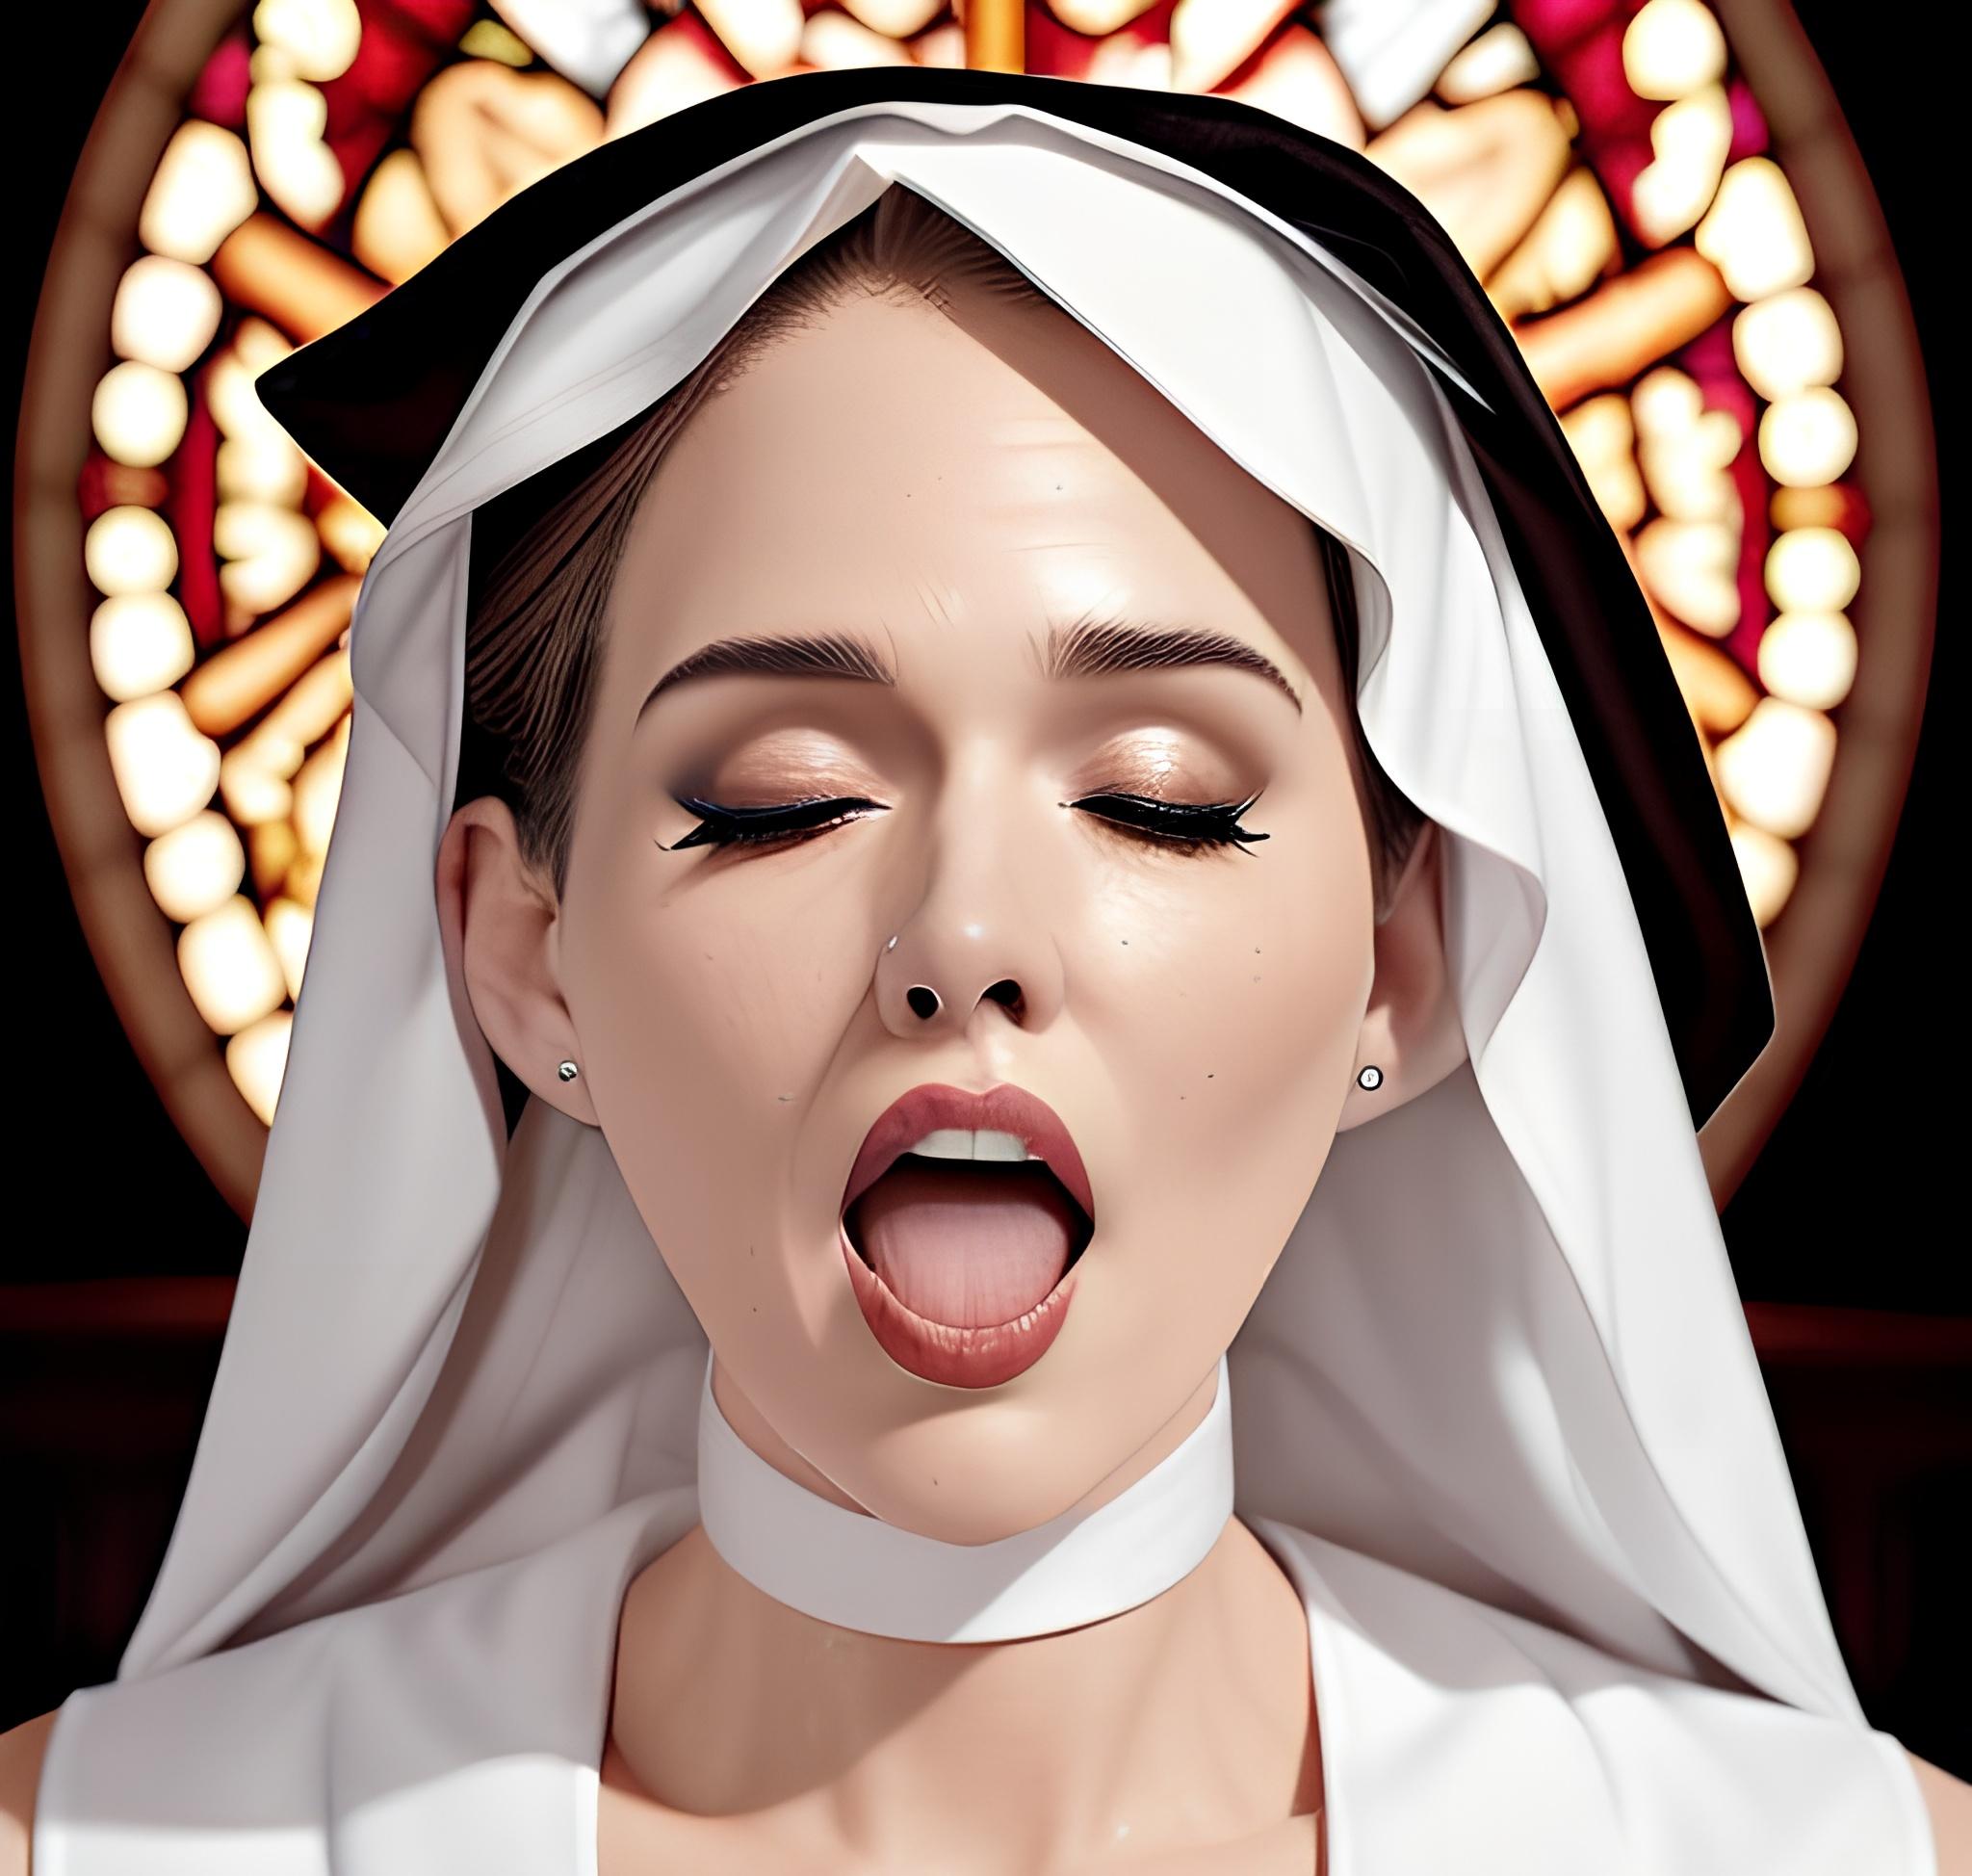 Let the church bells ring, as I cum and confess my sins to the 80yo nuns